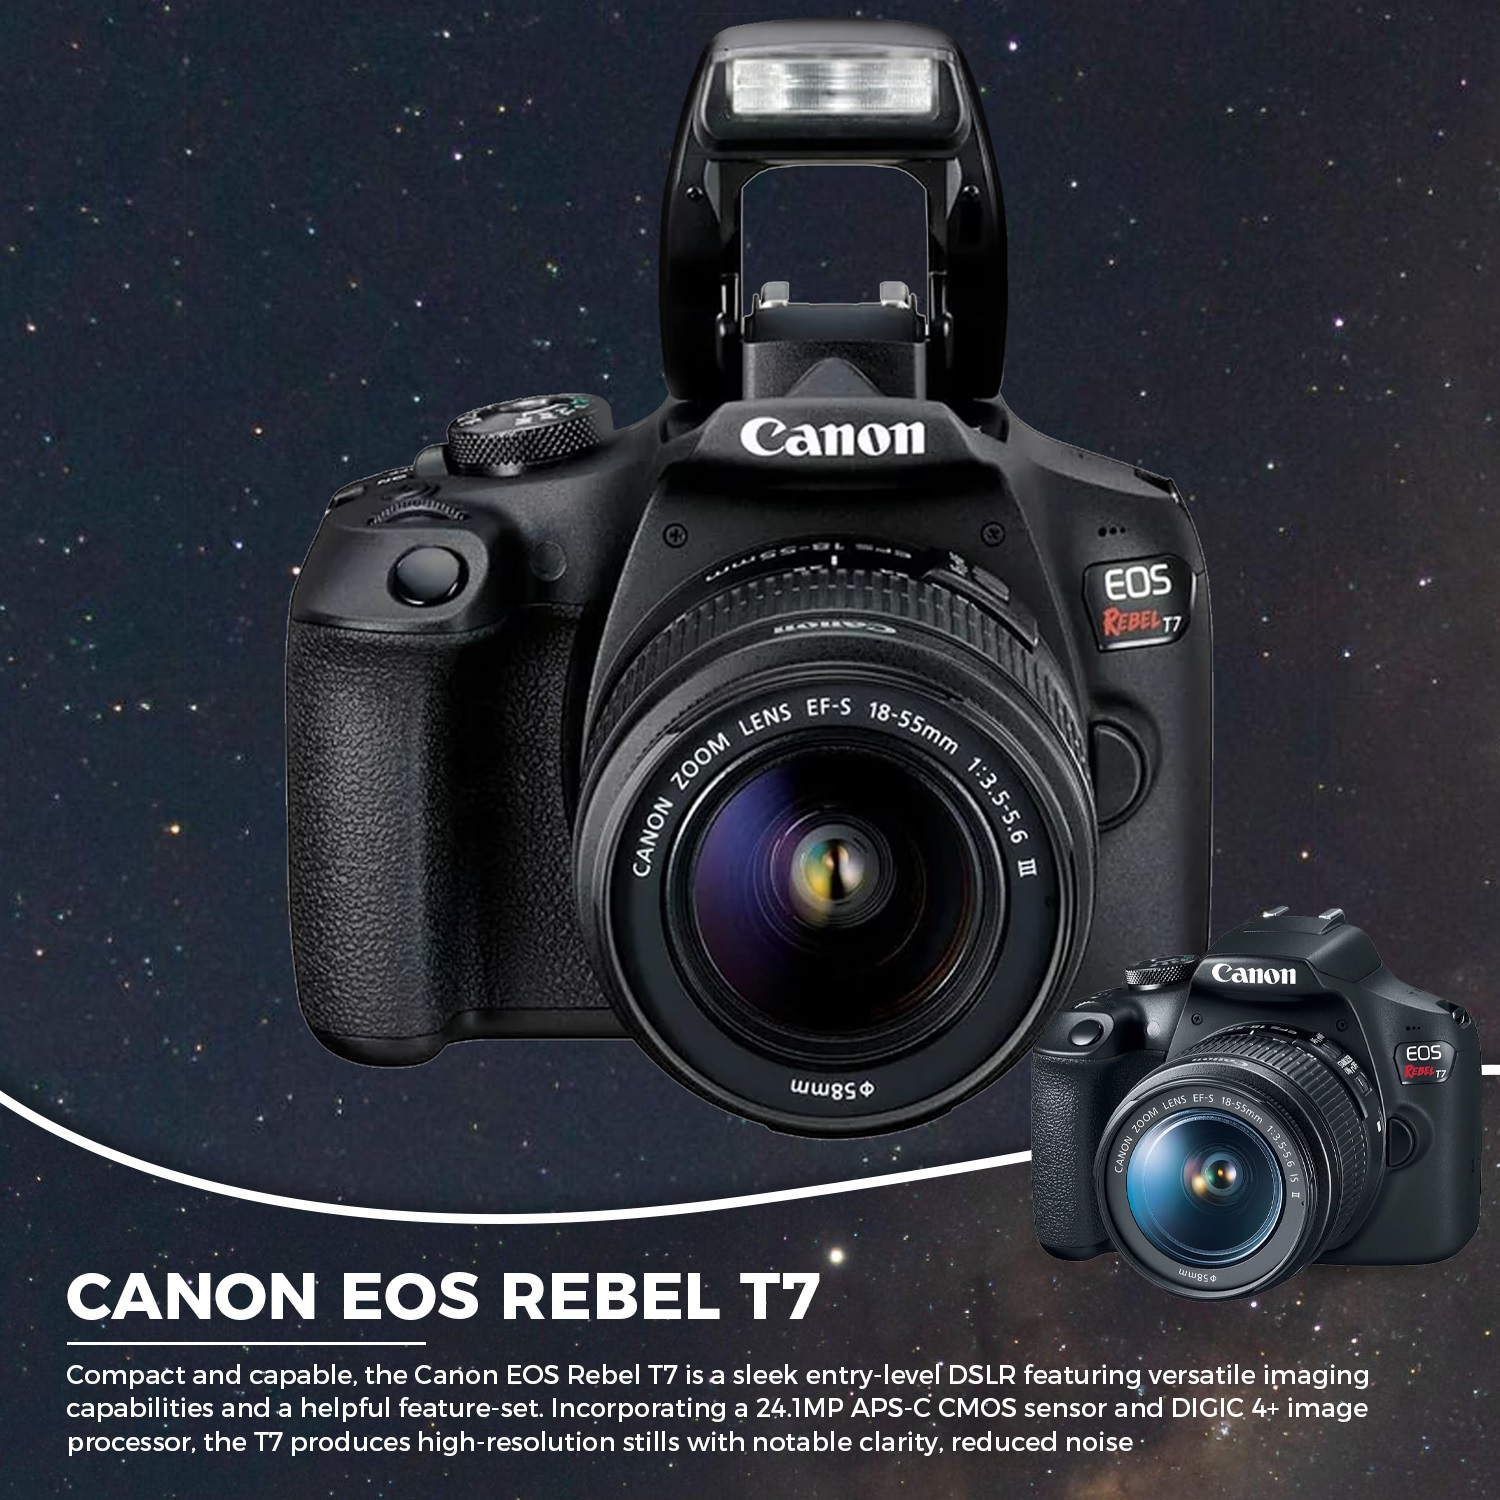 Canon EOS Rebel T7 DSLR Camera with 18-55mm Lens, Wi-Fi and Accessories: Bag, 64GB Card and More (New) - image 5 of 6